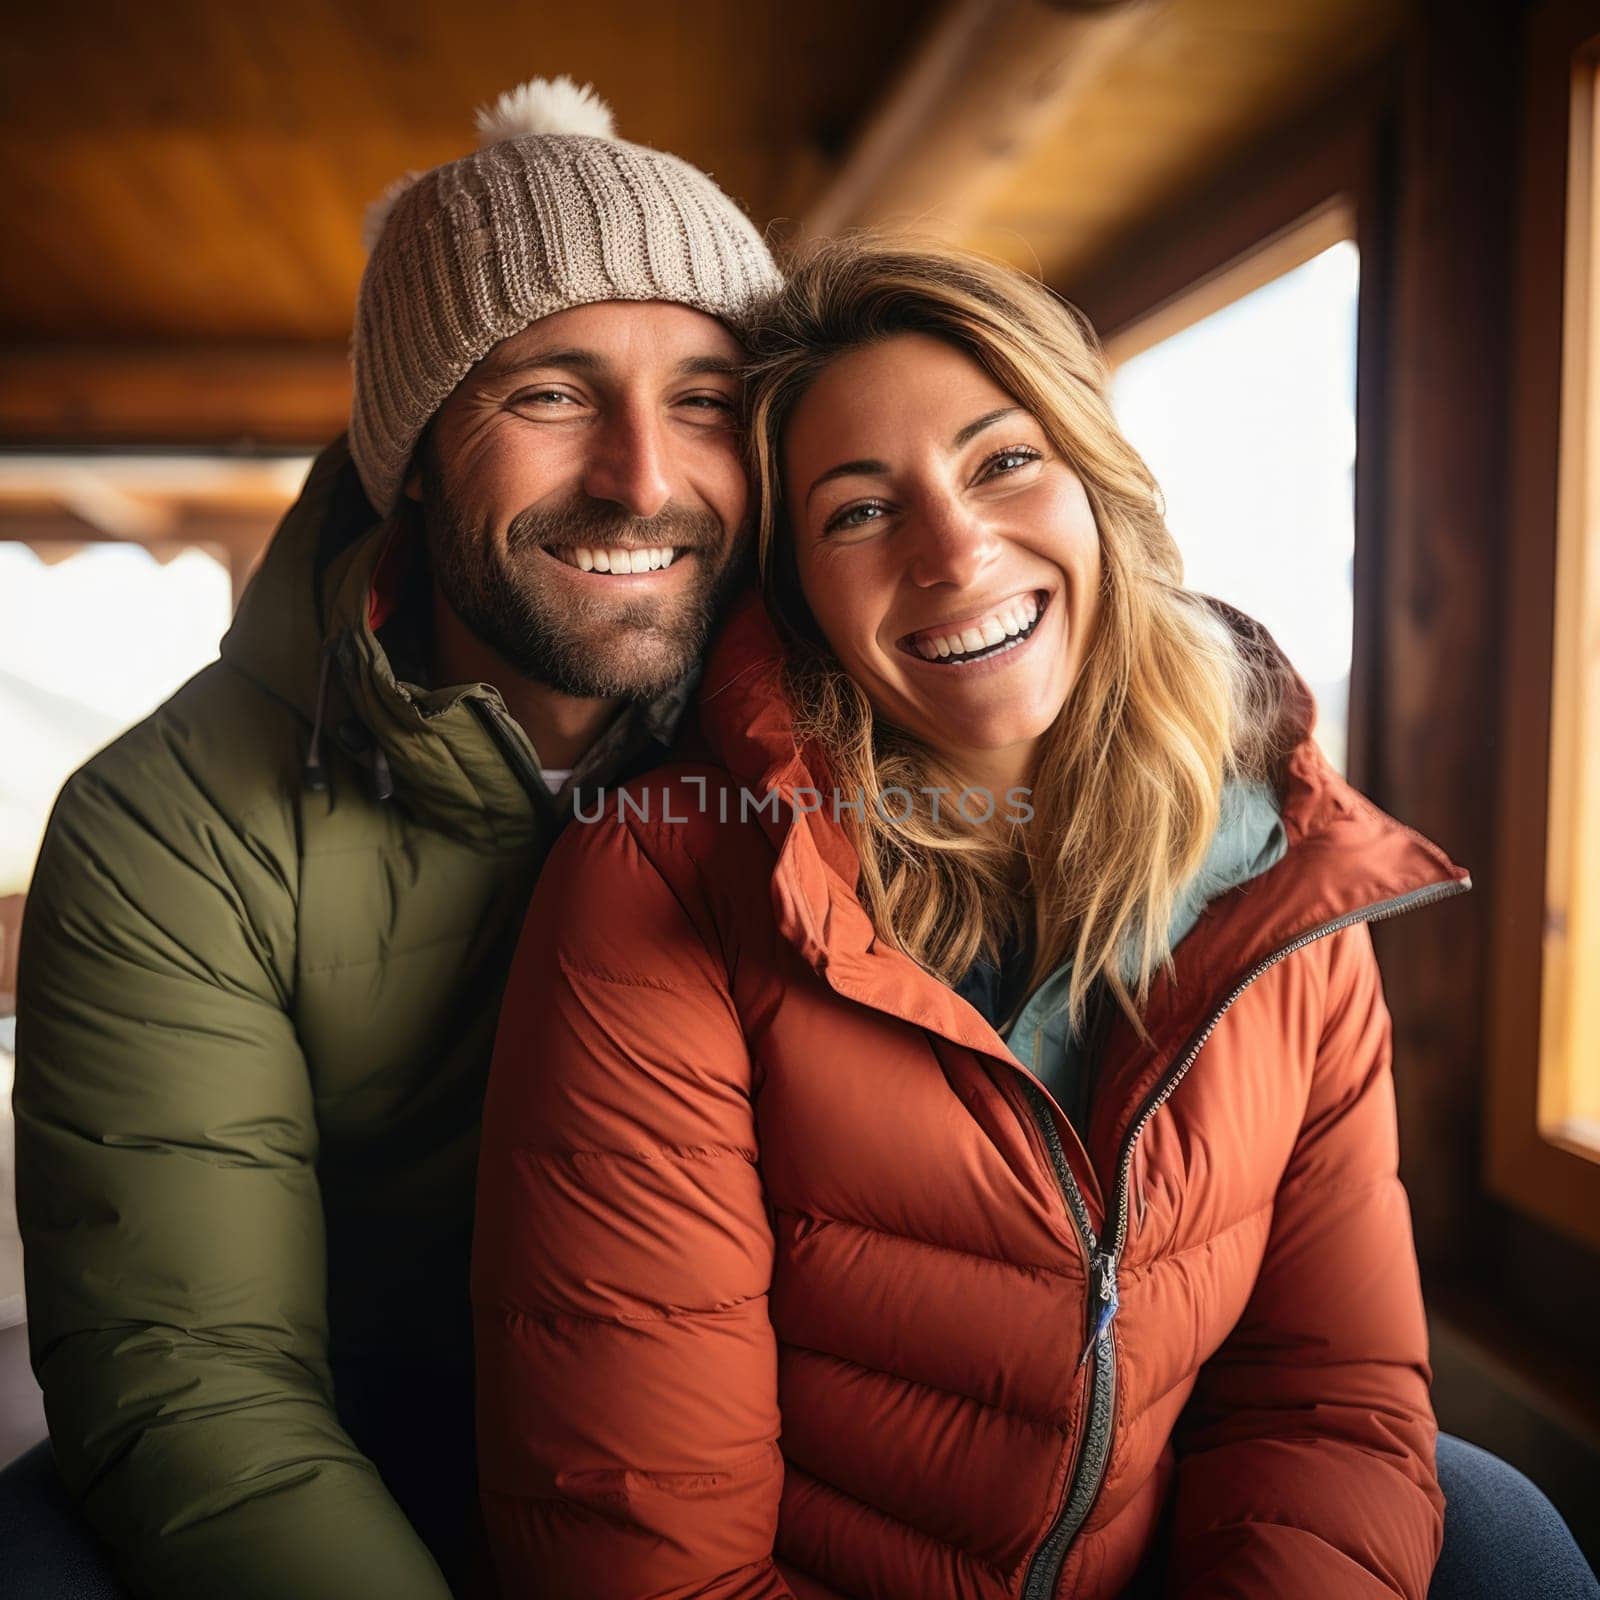 A man and woman in winter clothing are smiling